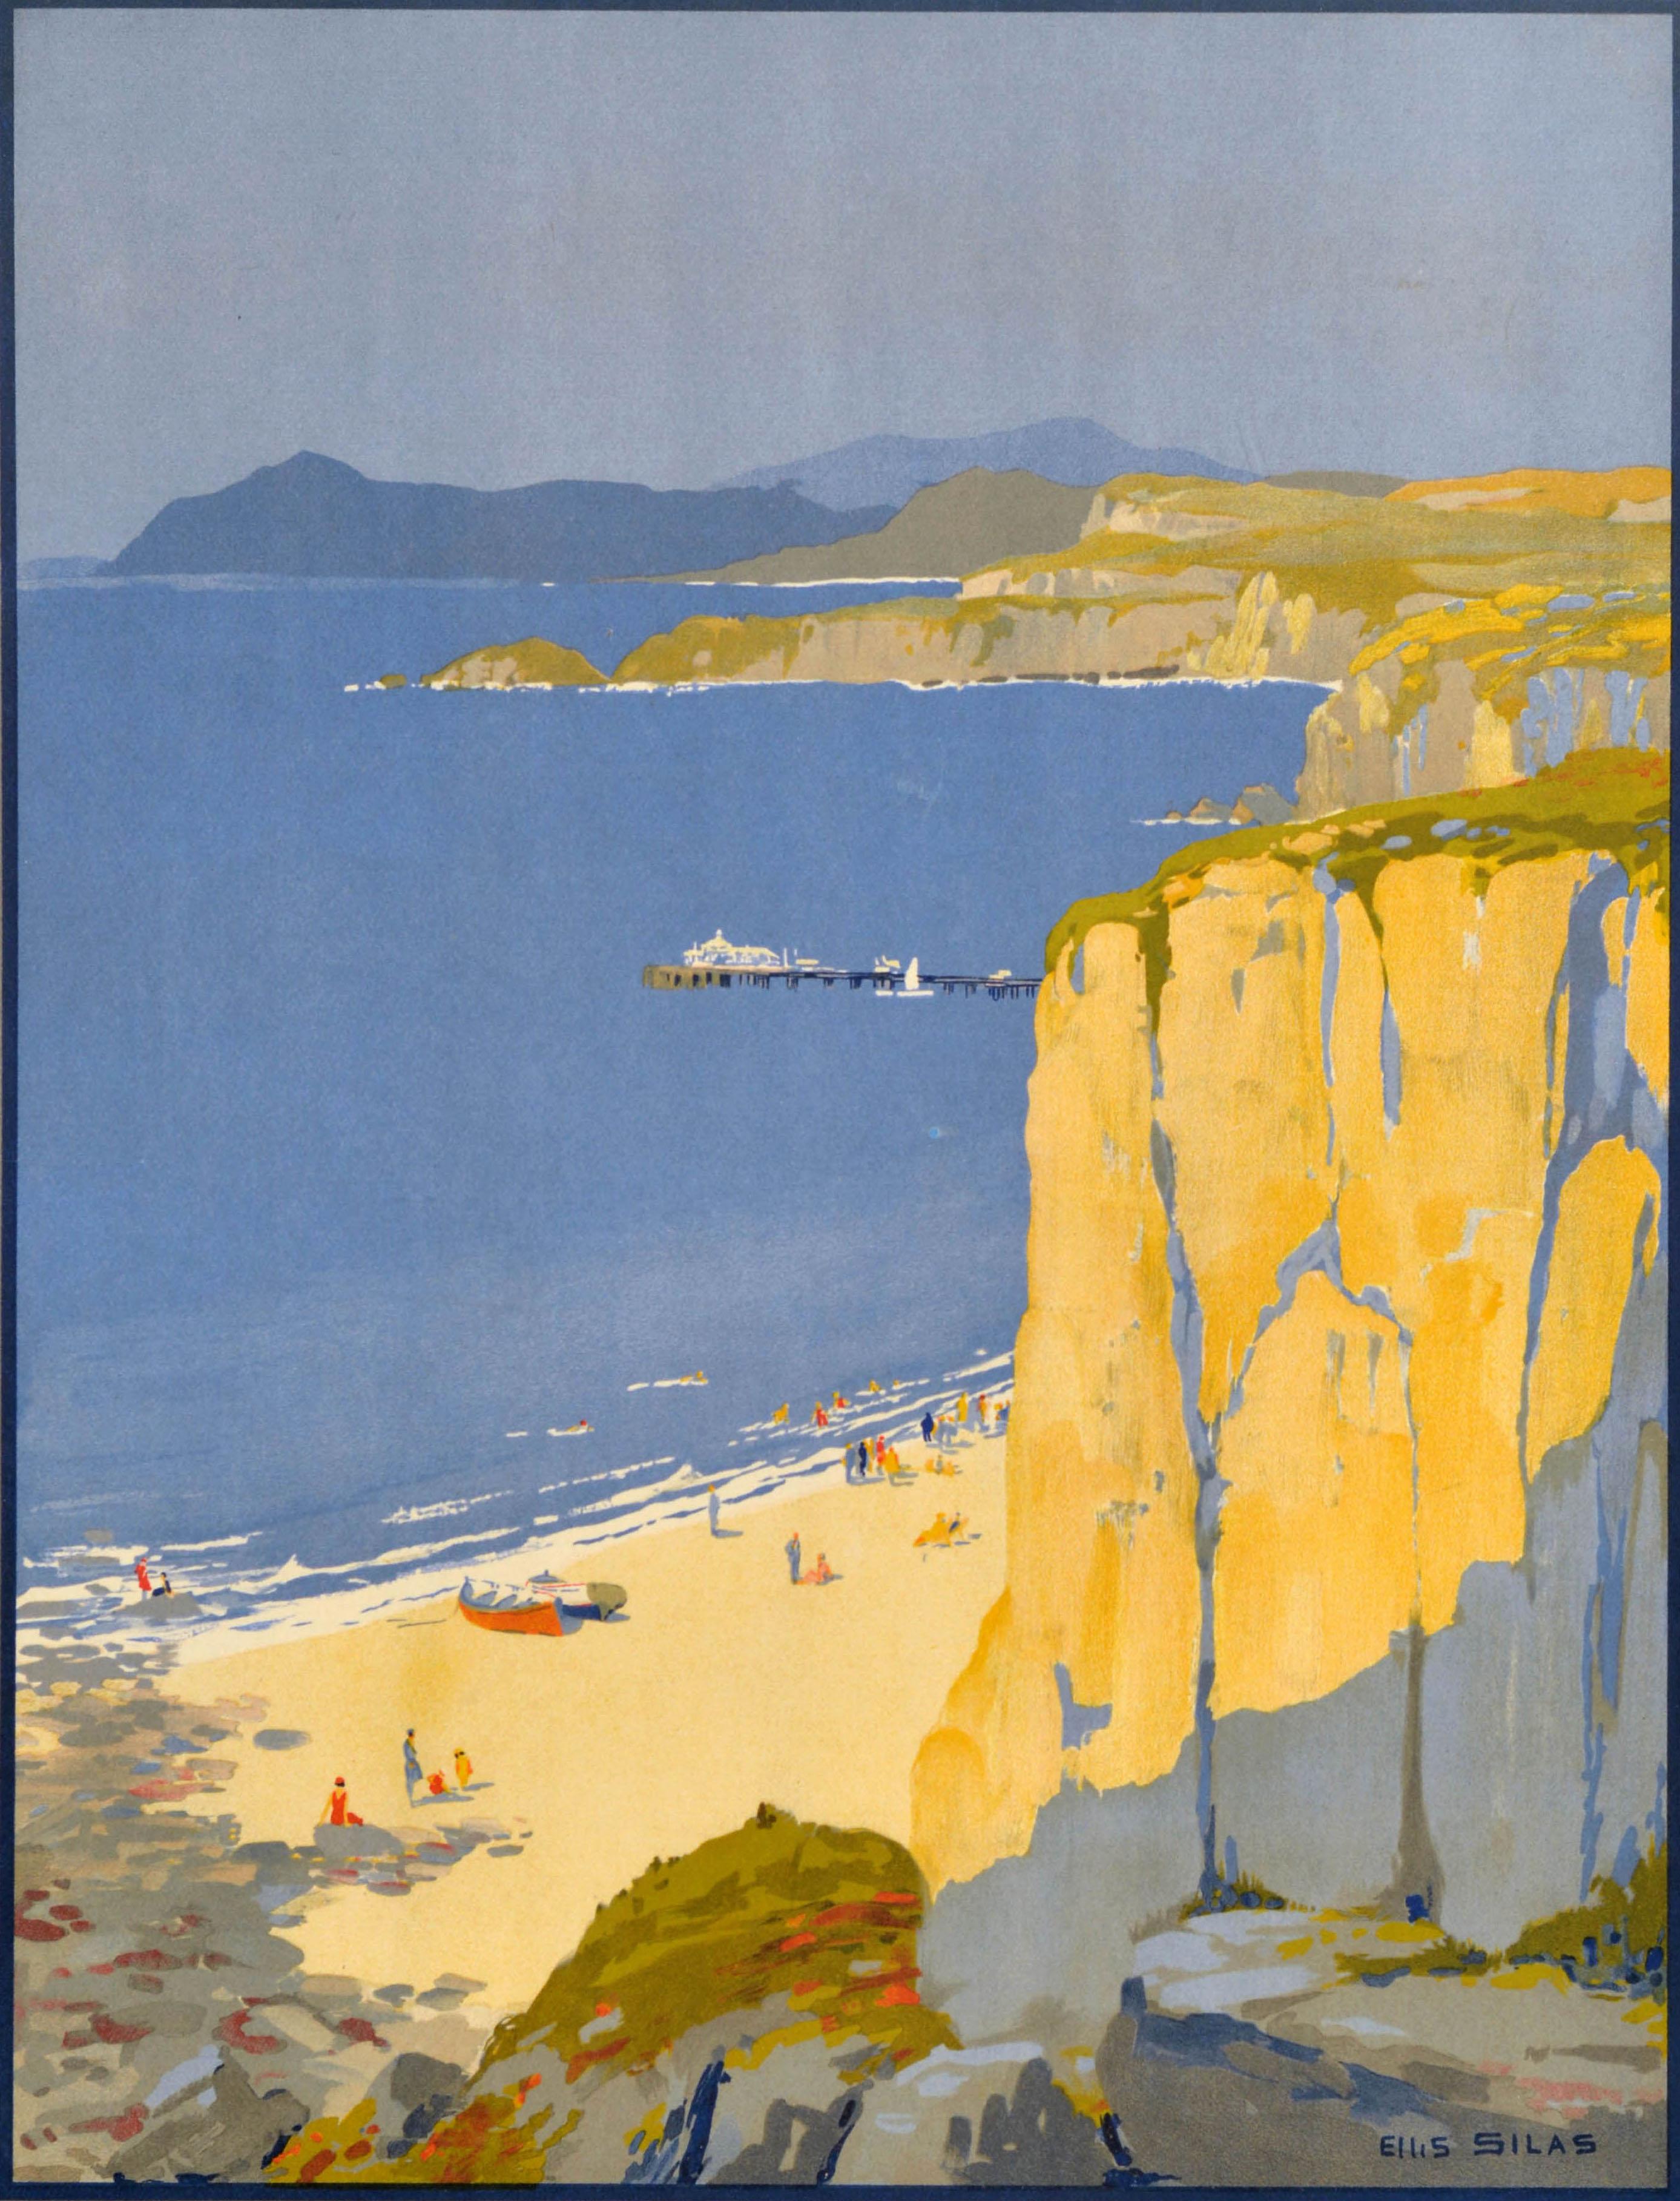 Original vintage LMS train travel poster - North Wales for Holidays cheap tickets and illustrated folder from the London Midland & Scottish Railway - featuring the text below a scenic view by the British artist Ellis Luciano Silas (1885-1972) of the